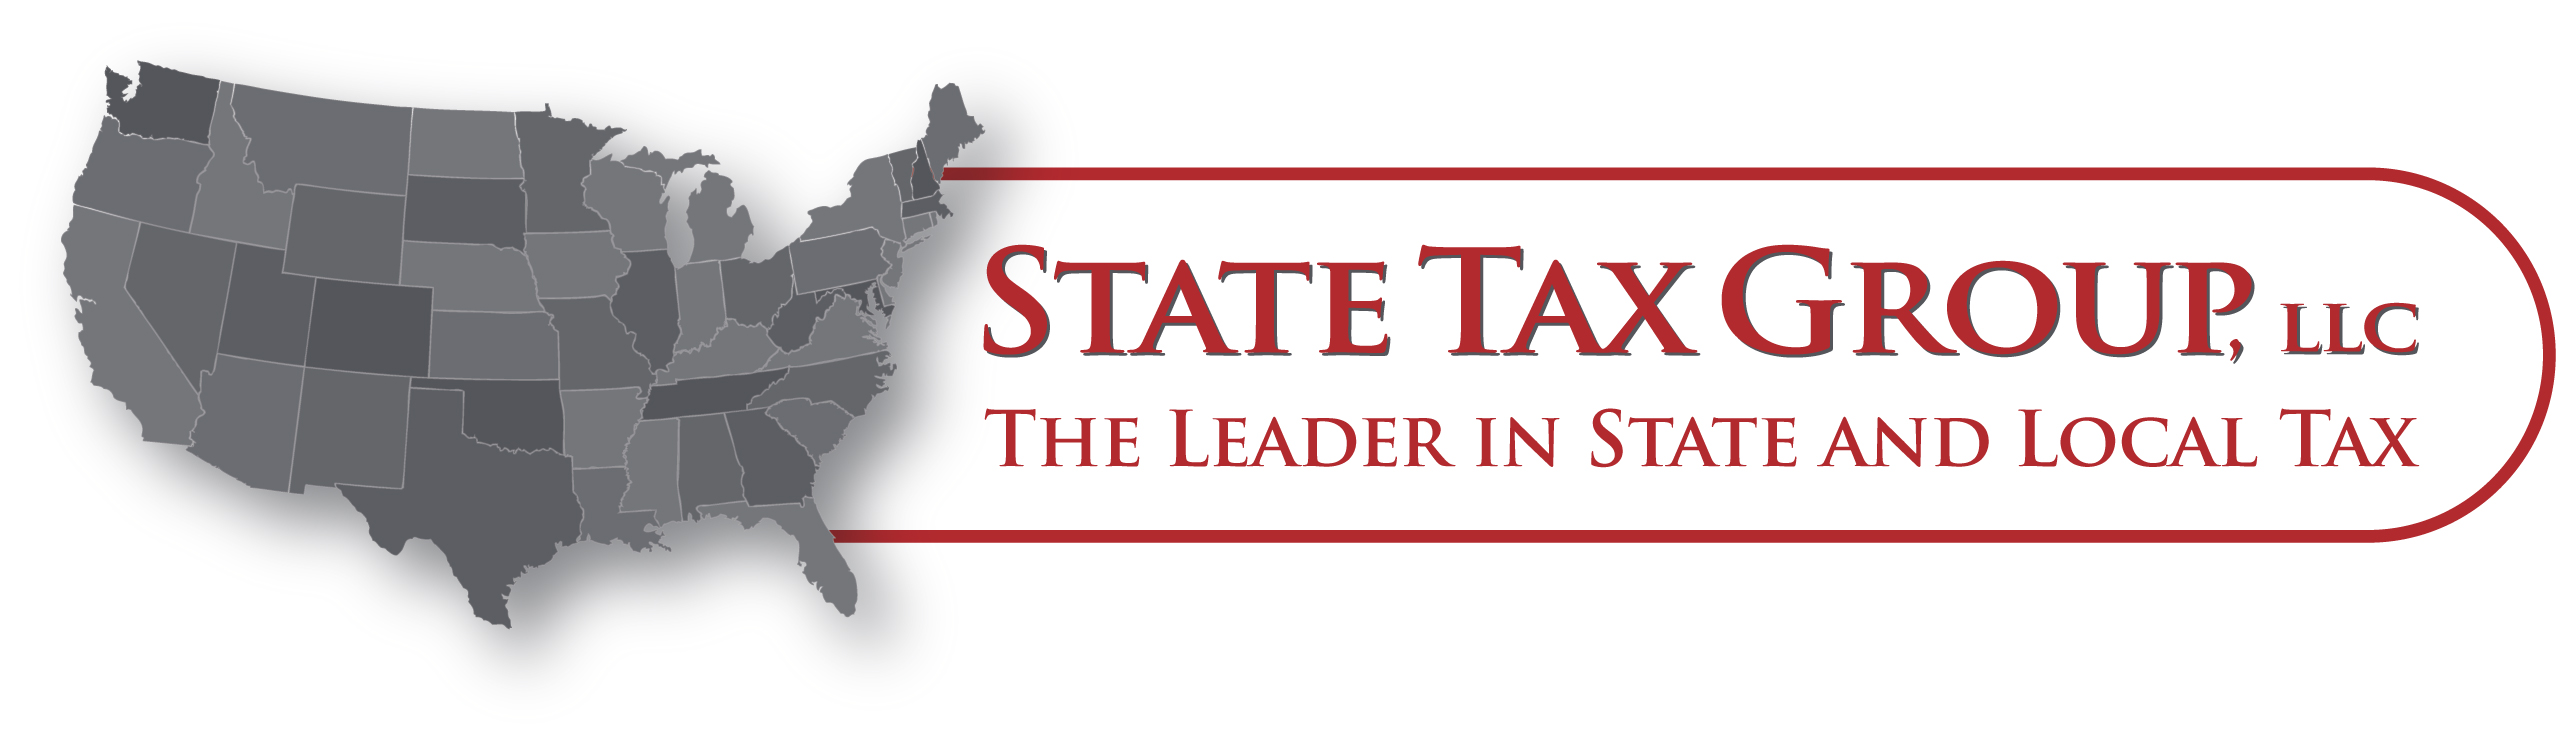 The Leader in State and Local Tax